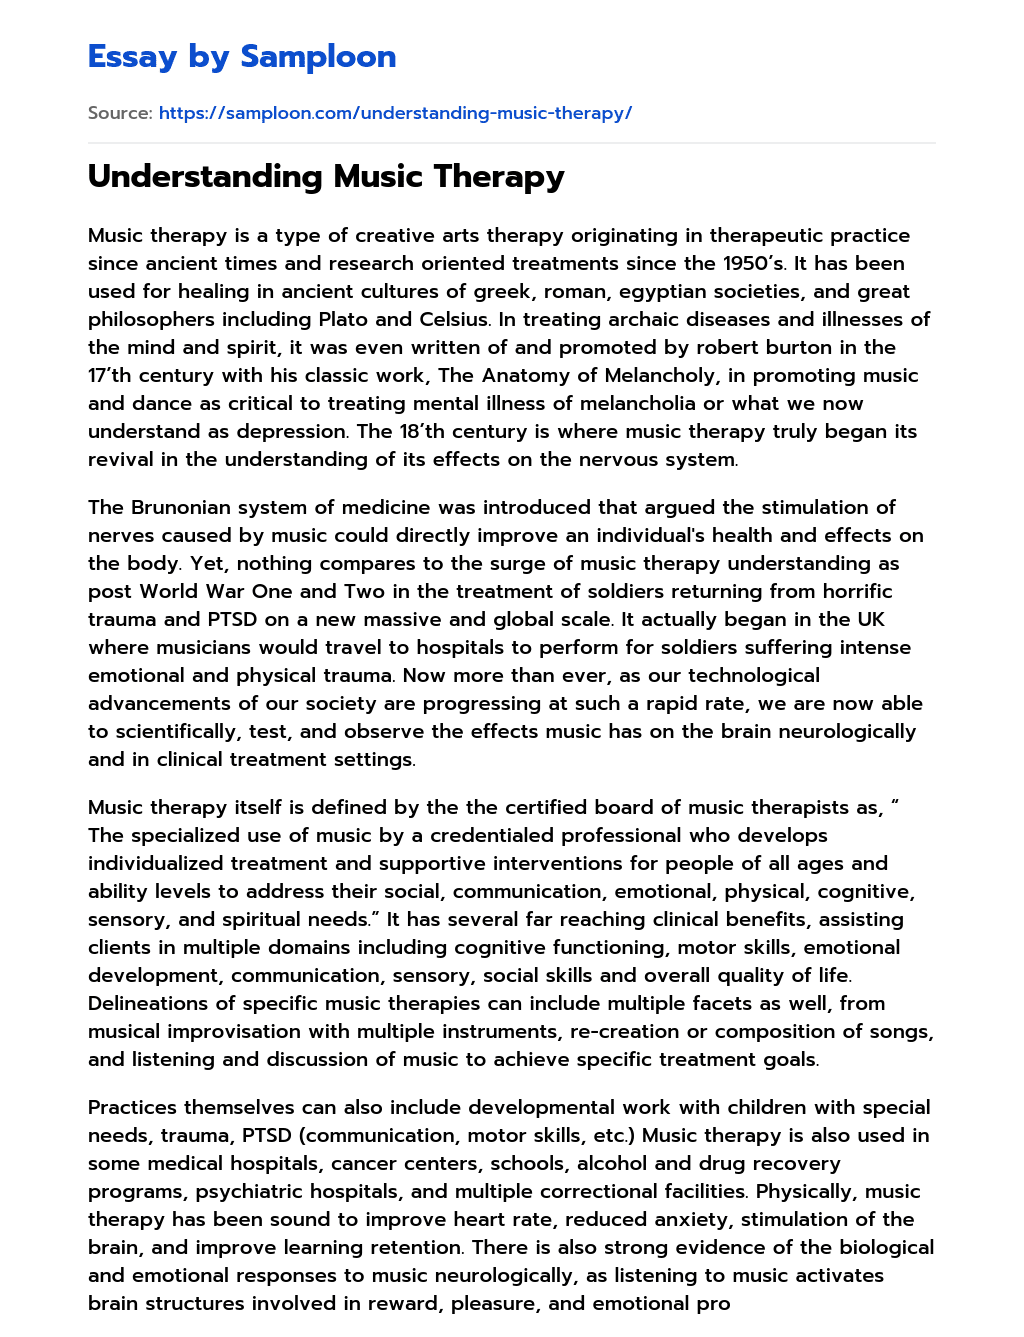 music therapy definition essay